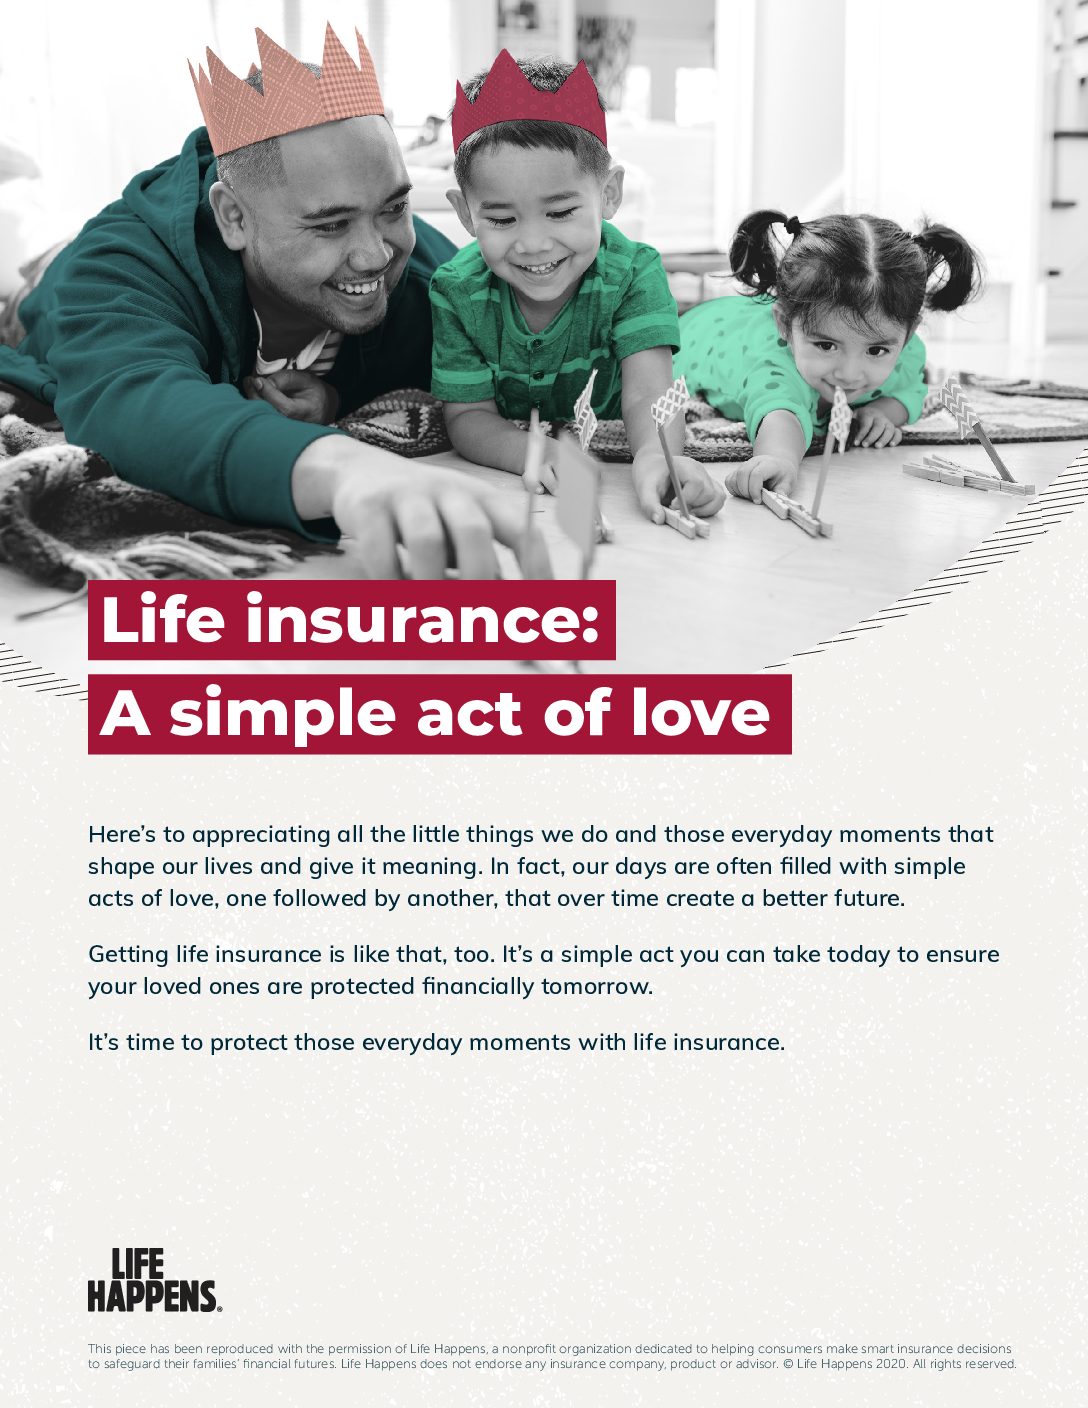 Insure Your Love Month